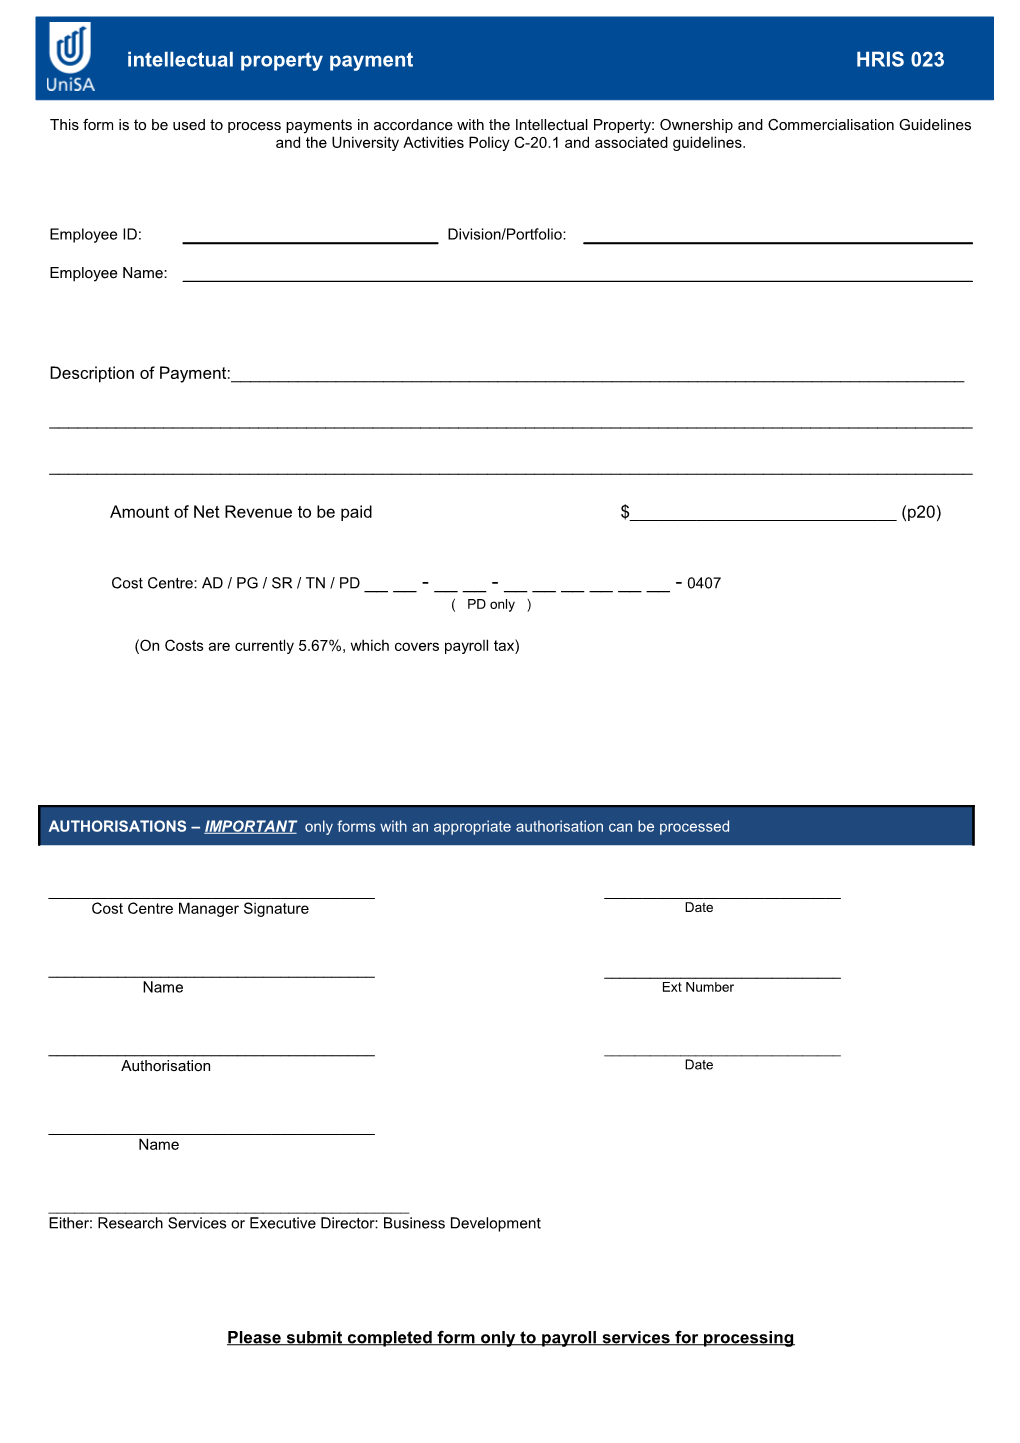 This Form Is to Be Used to Process Payments in Accordance with the Intellectual Property